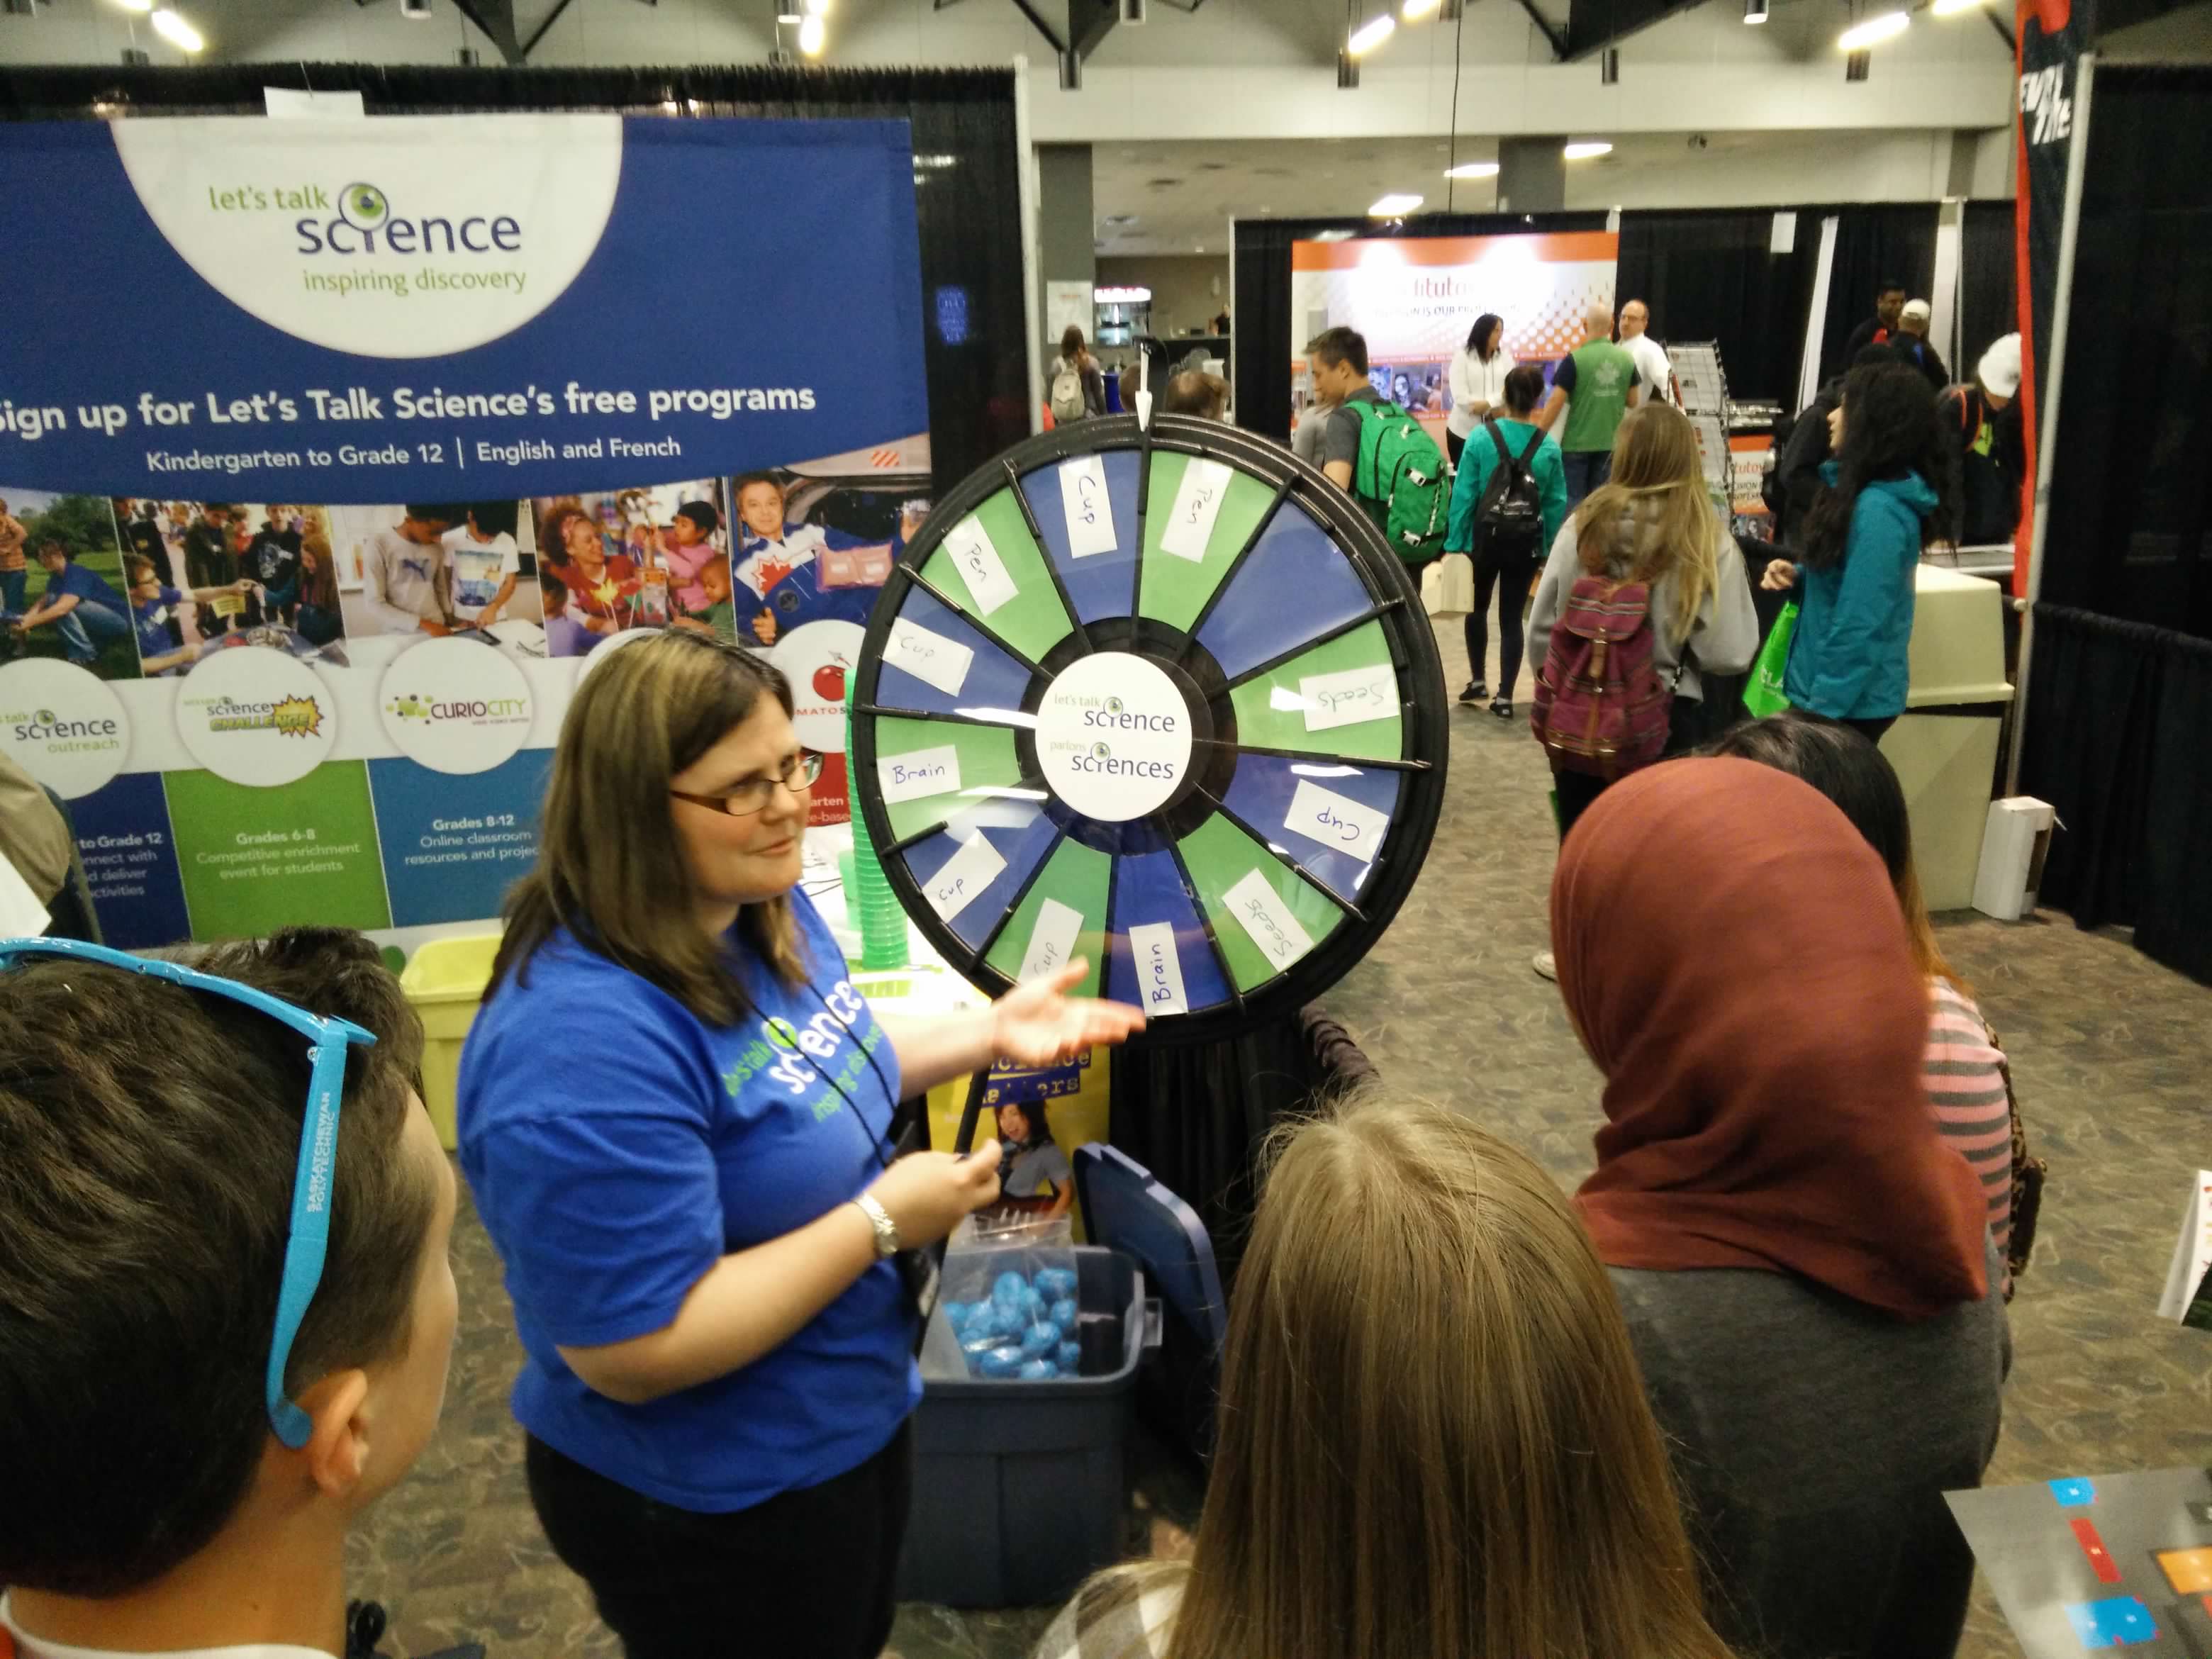 Glenda at a conference in a blue Let's Talk Science shirt talking to students in front of a blue and green prize wheel